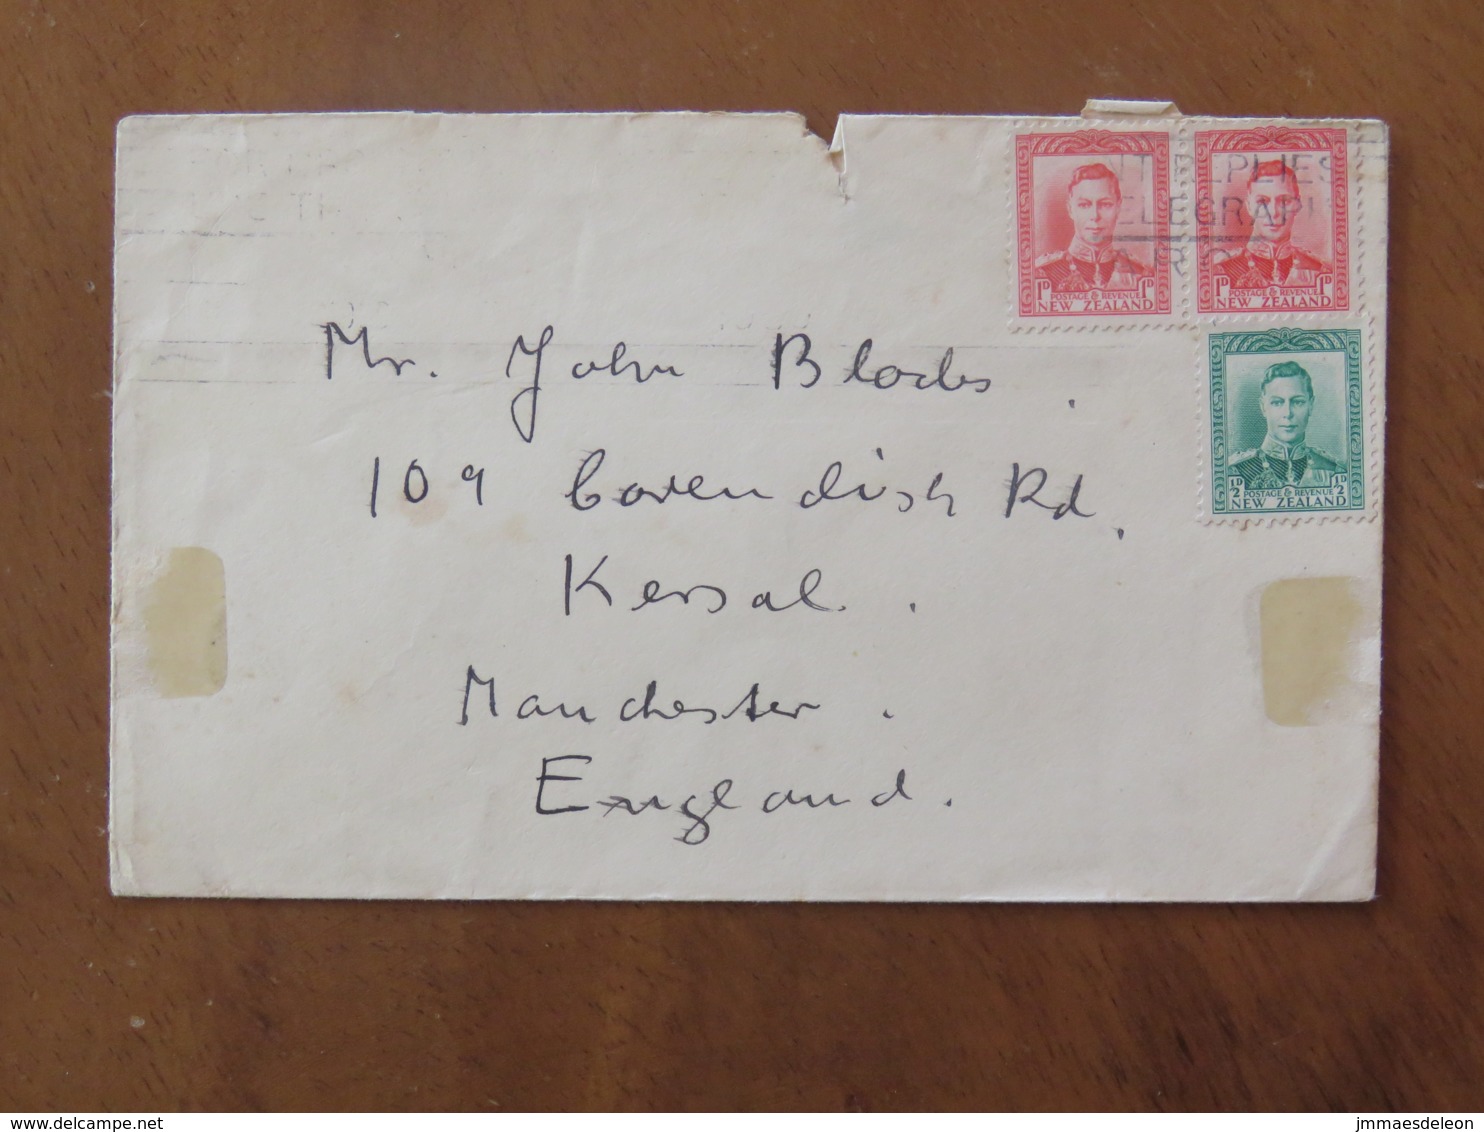 New Zealand 1947 Cover To England - King - Covers & Documents